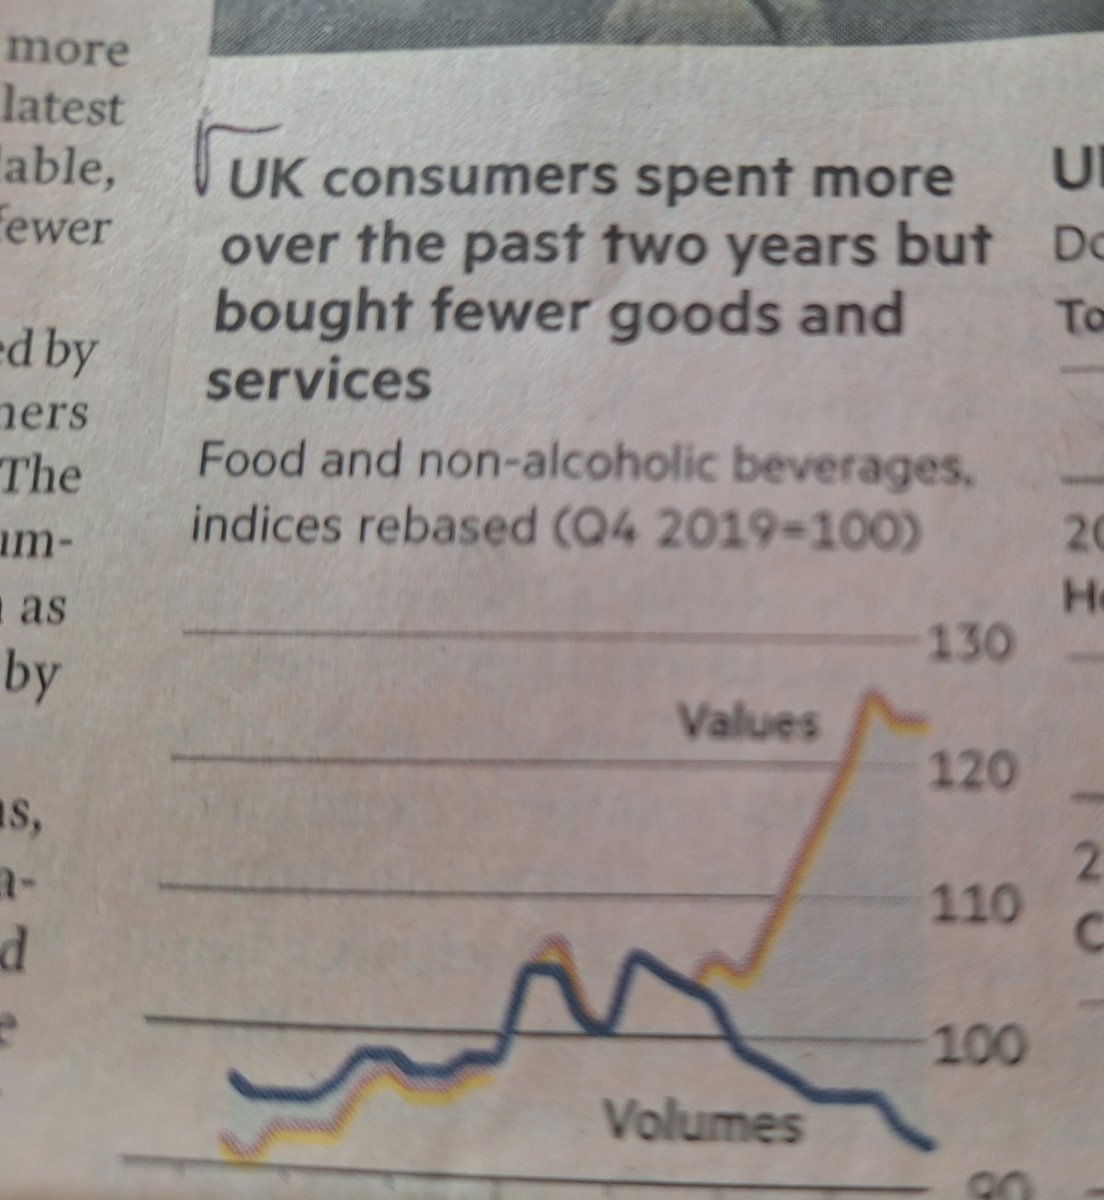 @henryj17 @Schnupperflug @joblijob16 @GilesMacDonogh @ColinHeyburn @omamoll The impact of inflation on spending in the UK Do you want to cut down on beer or the kids' new gear? It's a big decision in a town called malice youtube.com/watch?v=rbDD6N…